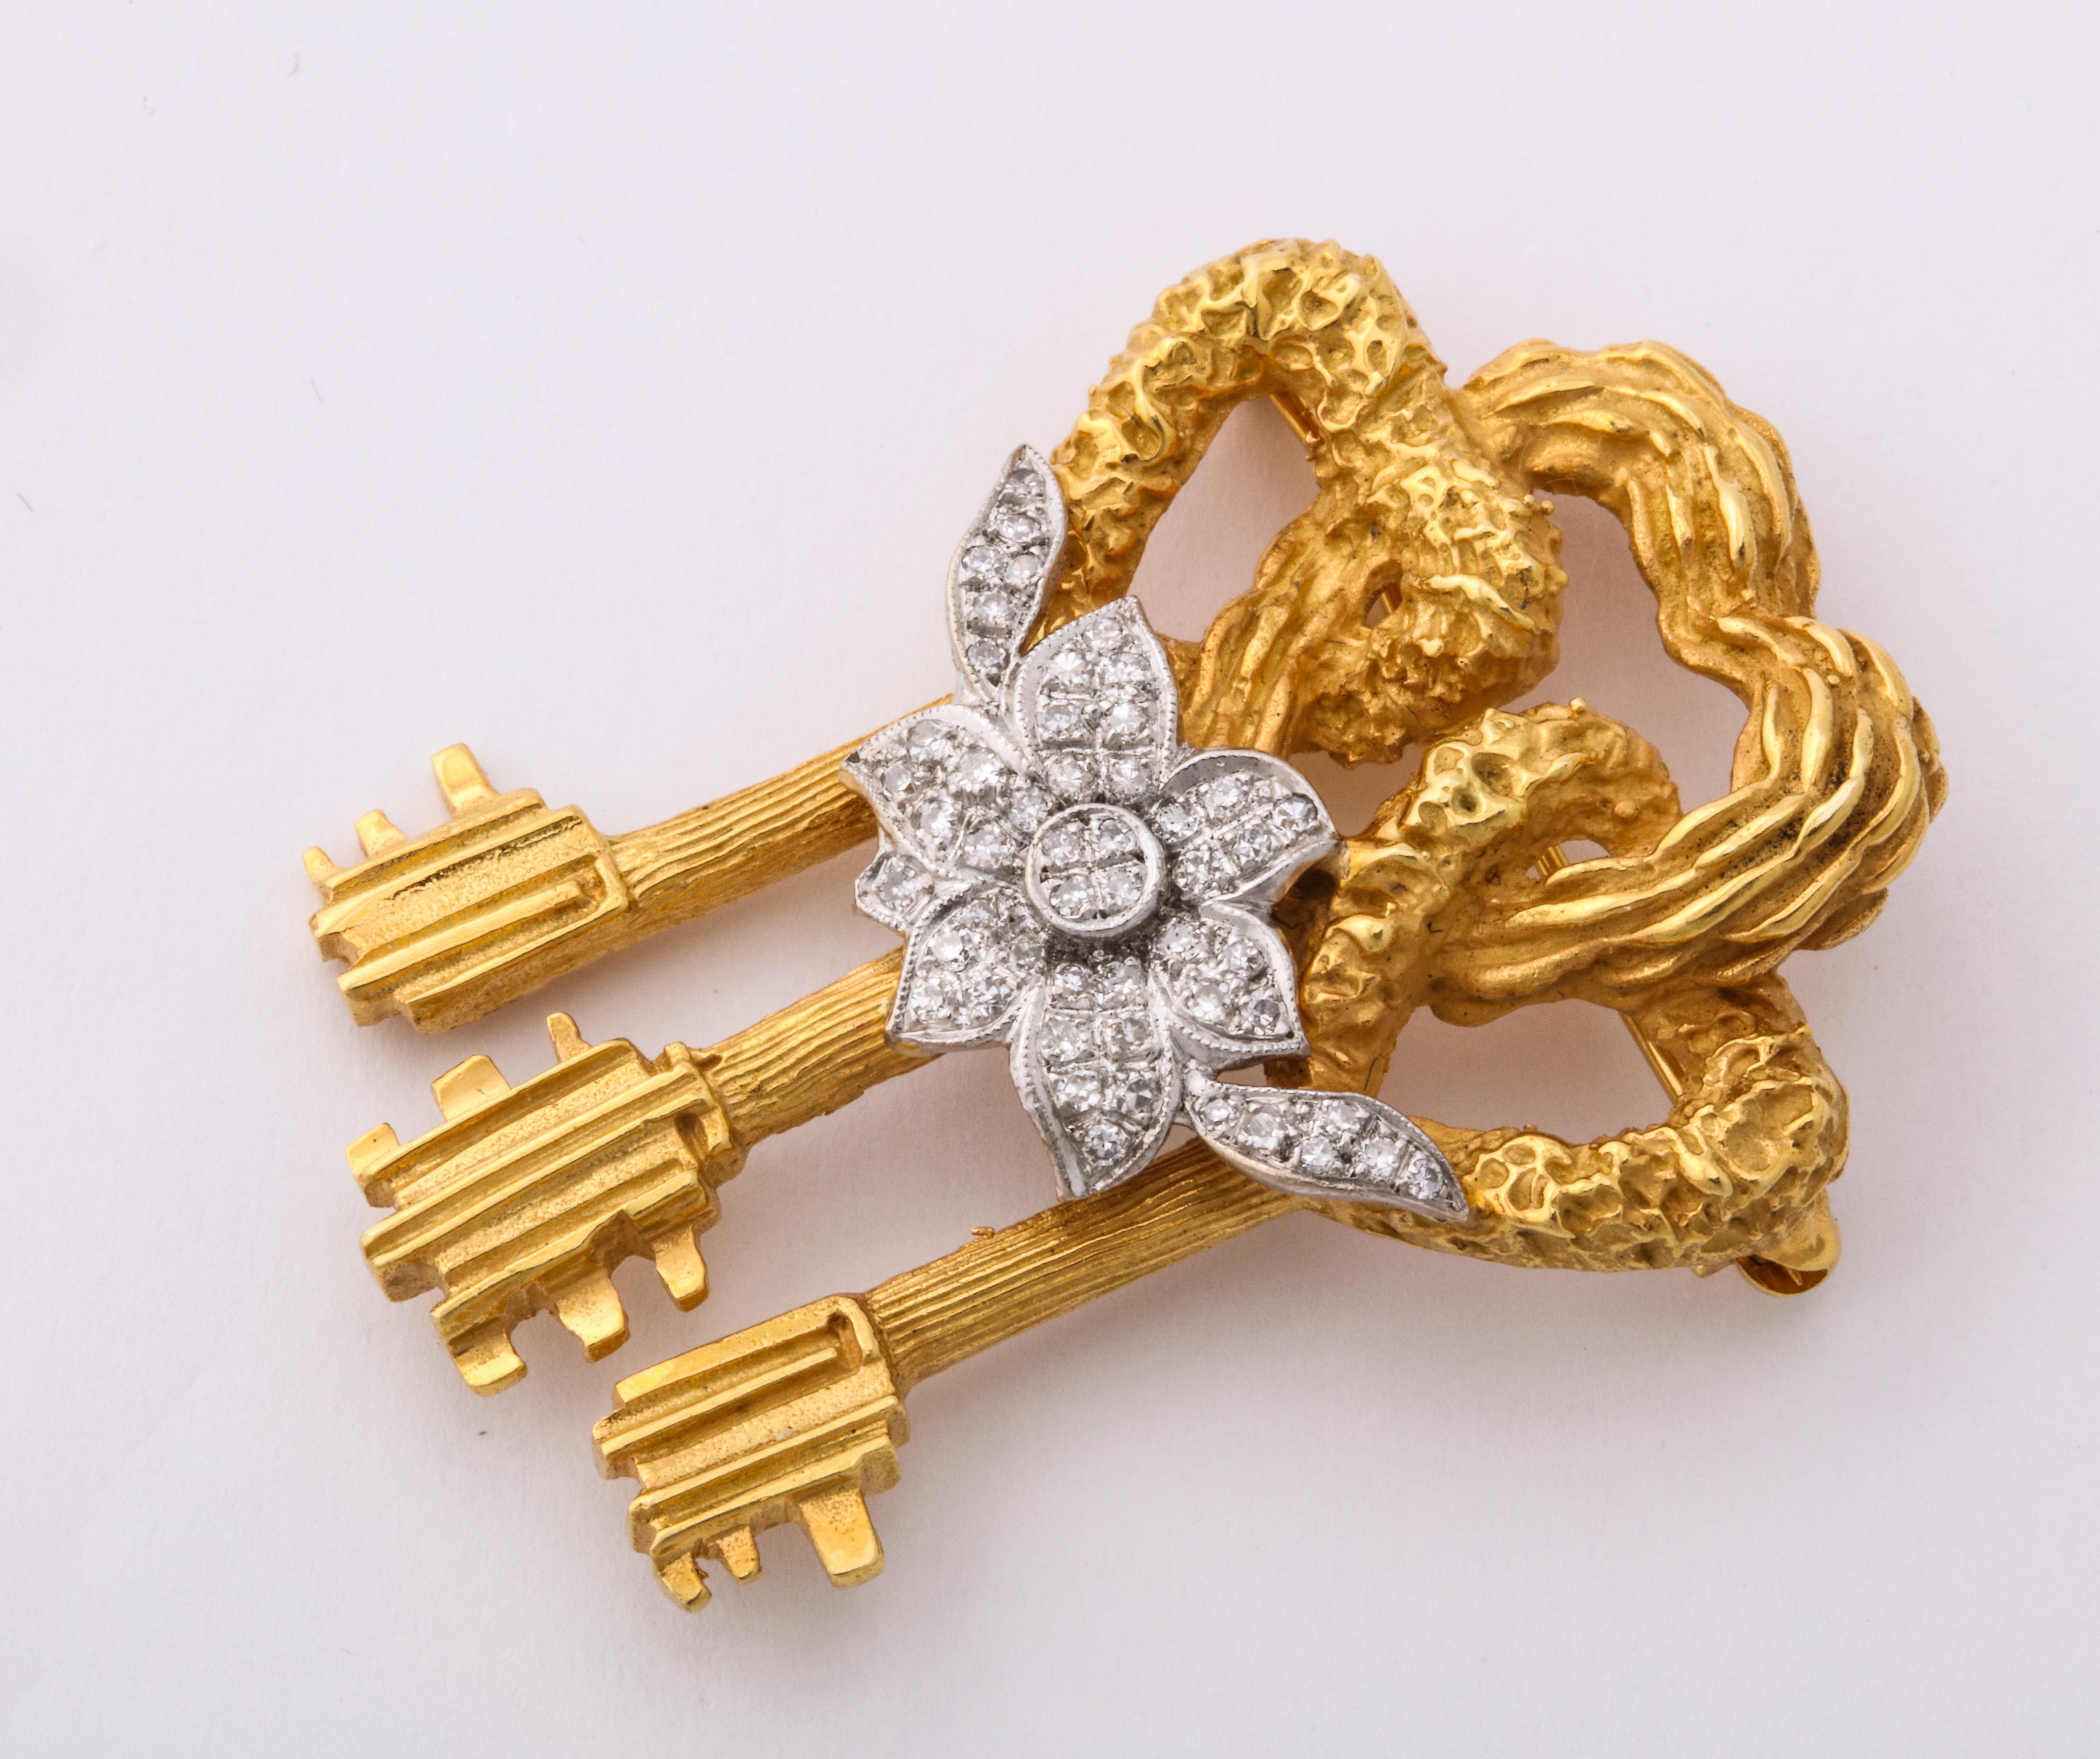 A Cartier Key to My Heart Brooch

A beautiful gold and diamond pin made by Cartier depicting three intertwined heart keys held together by a magnificent diamond flower.

Signed Cartier

18 karat gold


Depicted in full page spread in the 